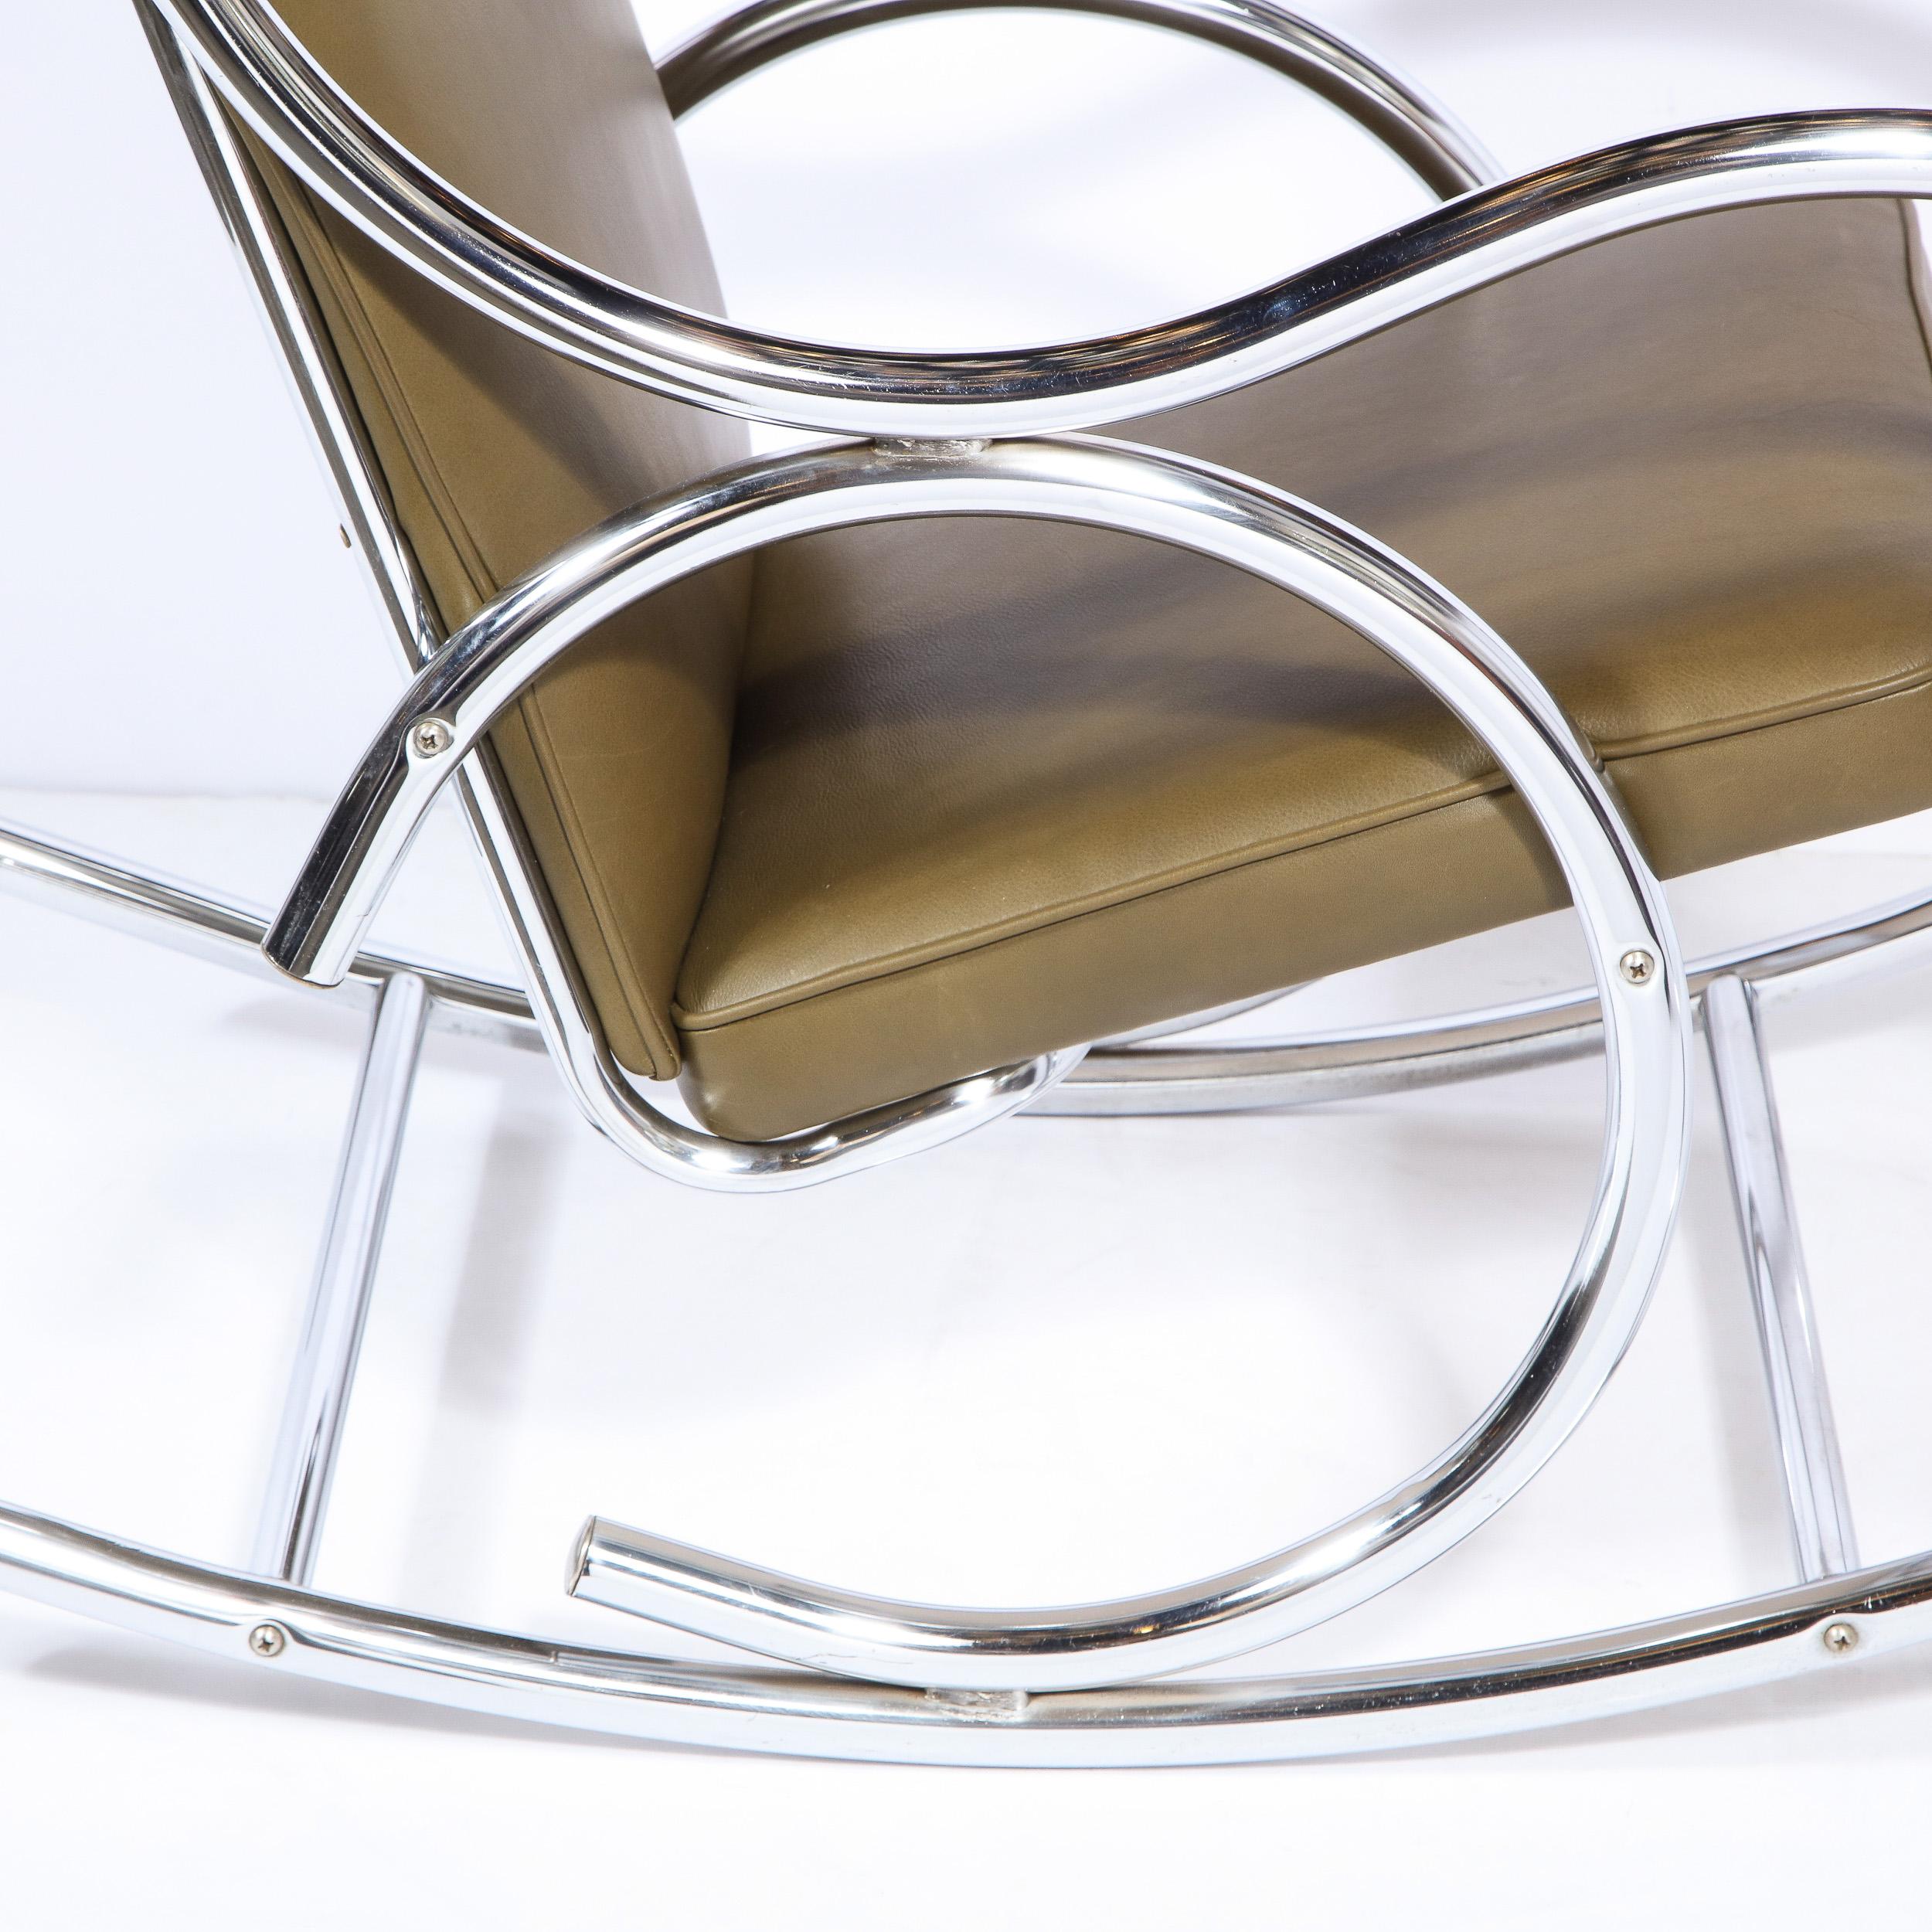 Late 20th Century Mid-Century Modern Polished Chrome Curvilinear Rocking Chair in Olive Leather